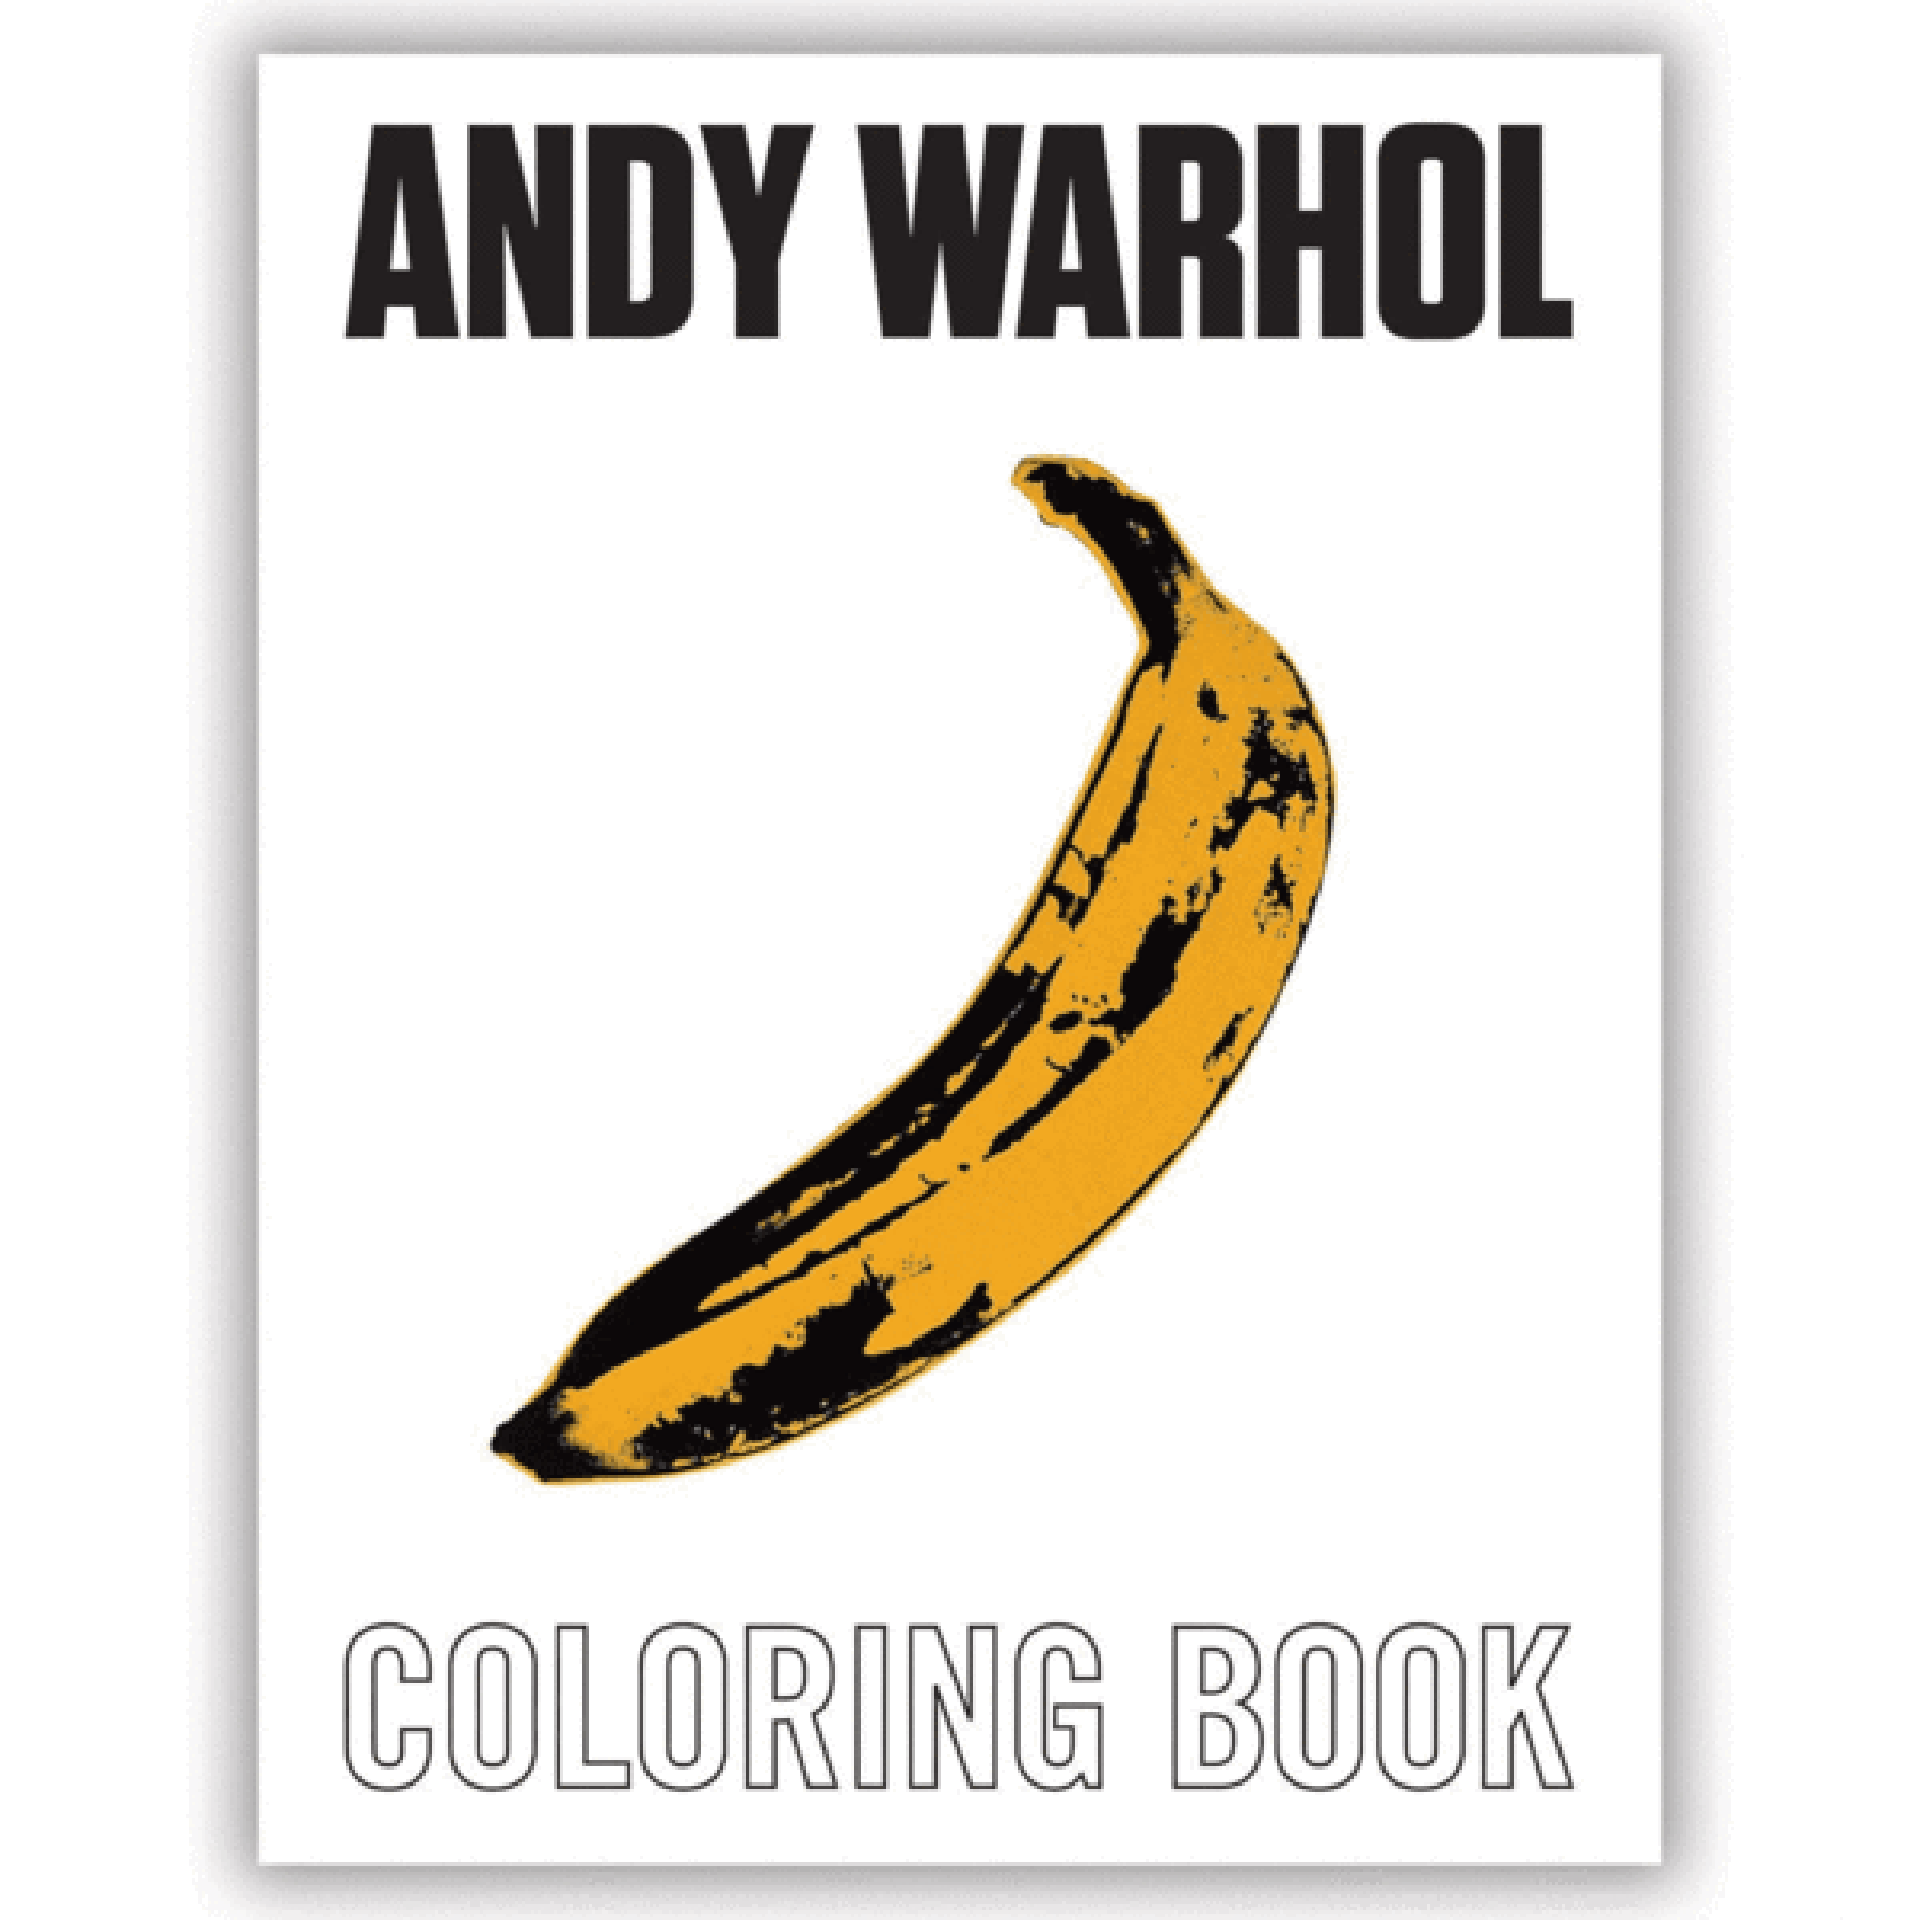 The Andy Warhol Coloring Book, $9.99